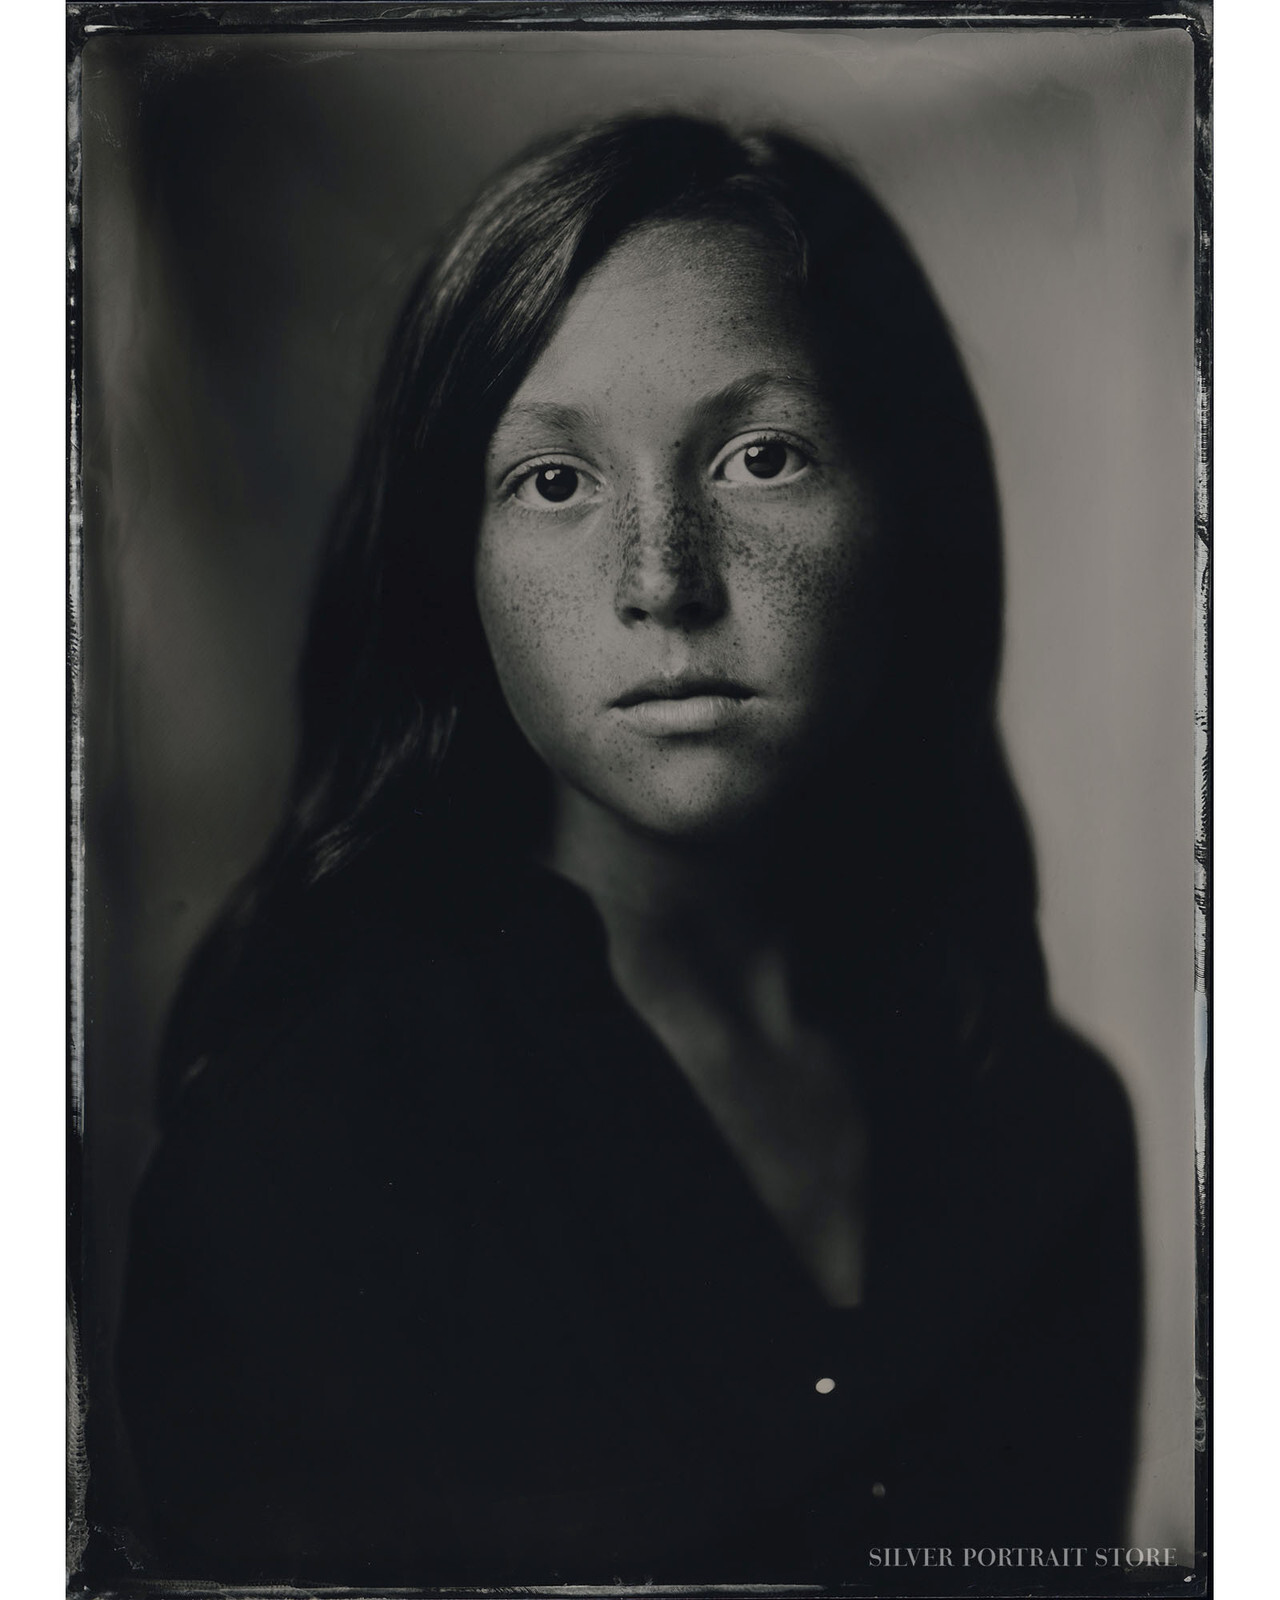 Eline-Silver Portrait Store-scan from Wet plate collodion-Tintype 13 x 18 cm.